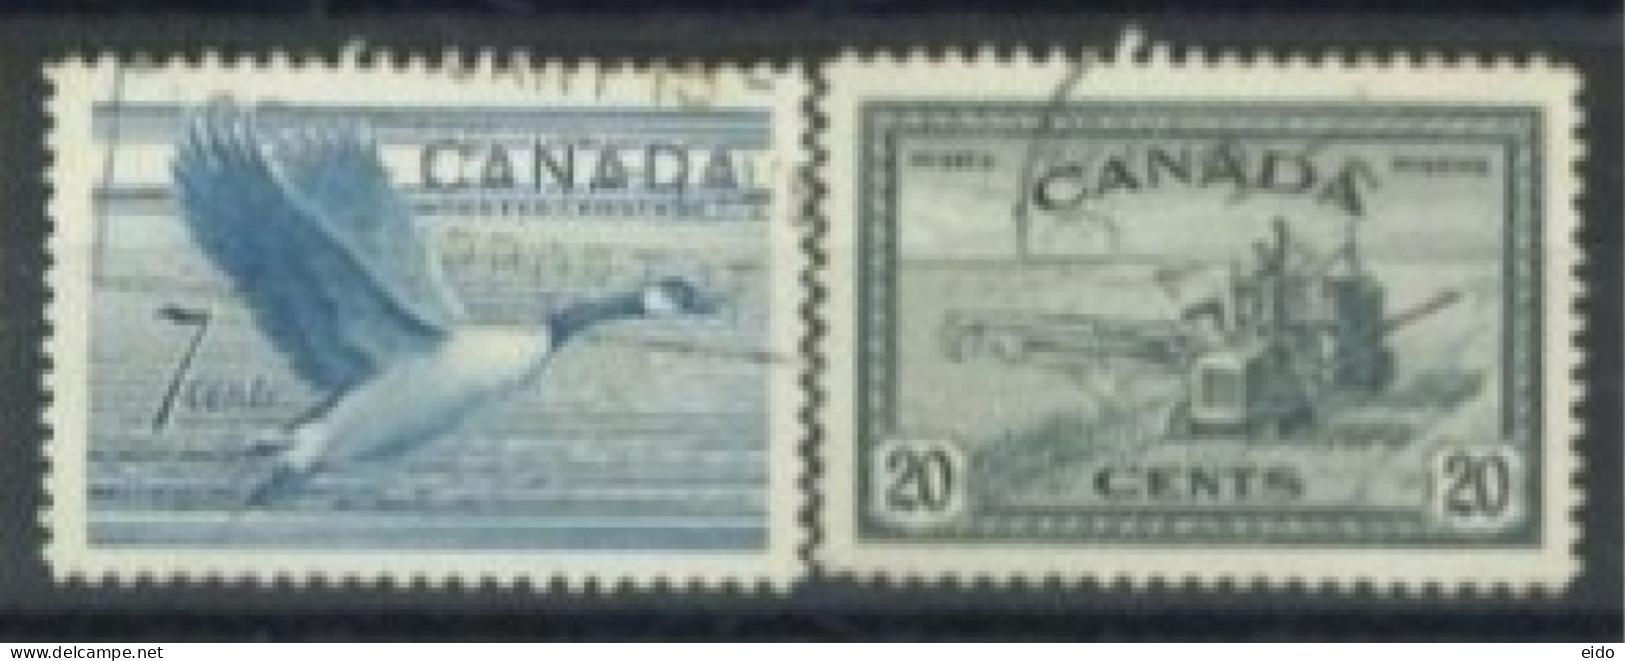 CANADA - 1951/52, CANADIAN GOOSE & COMBINE HARVESTER STAMPS SET OF 2, USED. - Usati